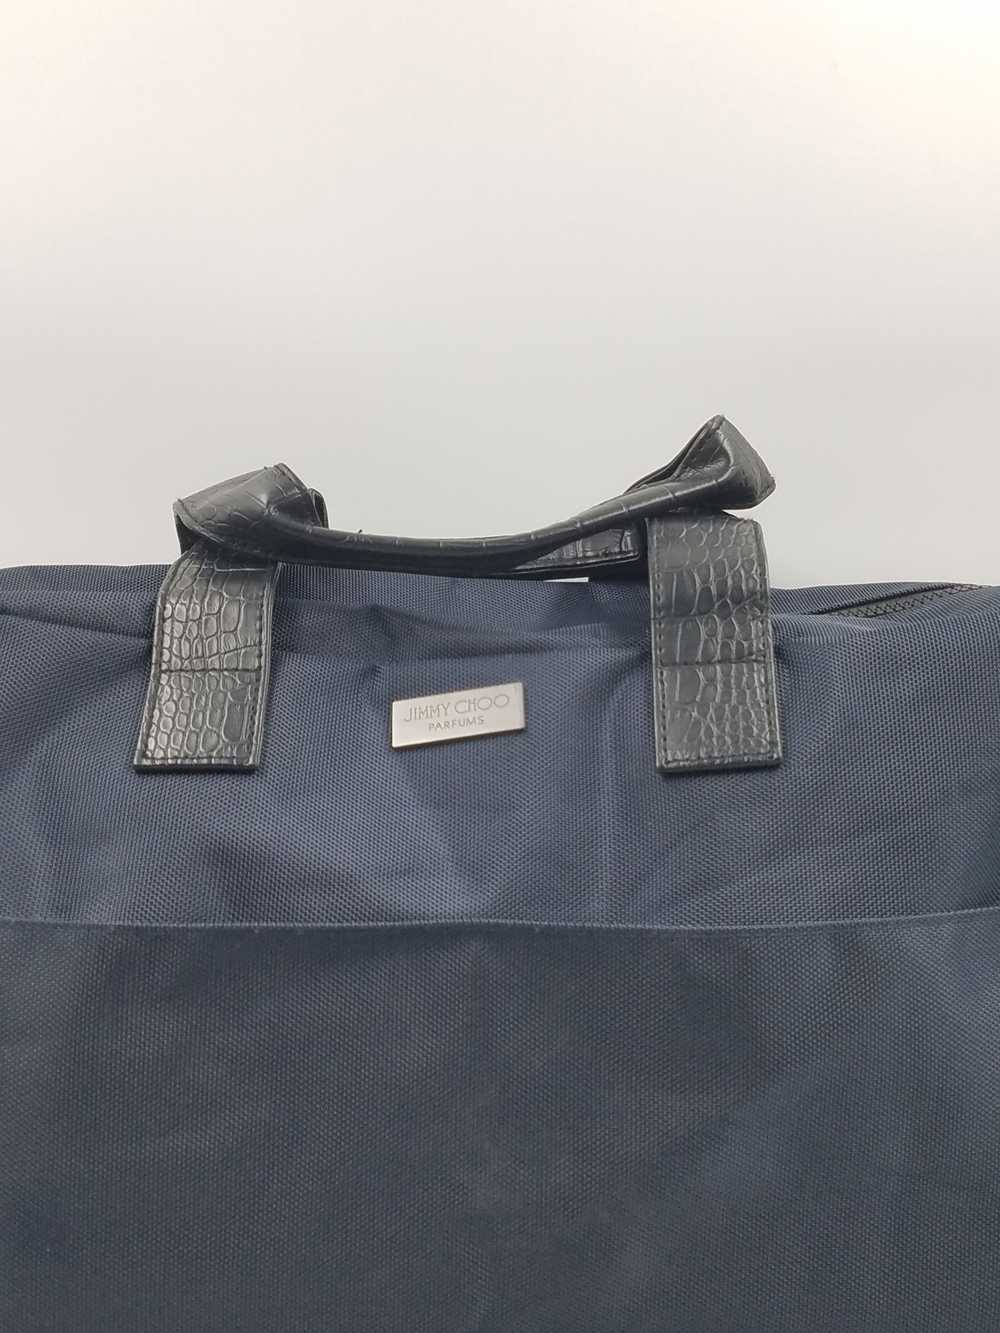 Authentic Jimmy Choo Parfums Navy Duffle Bag - image 7